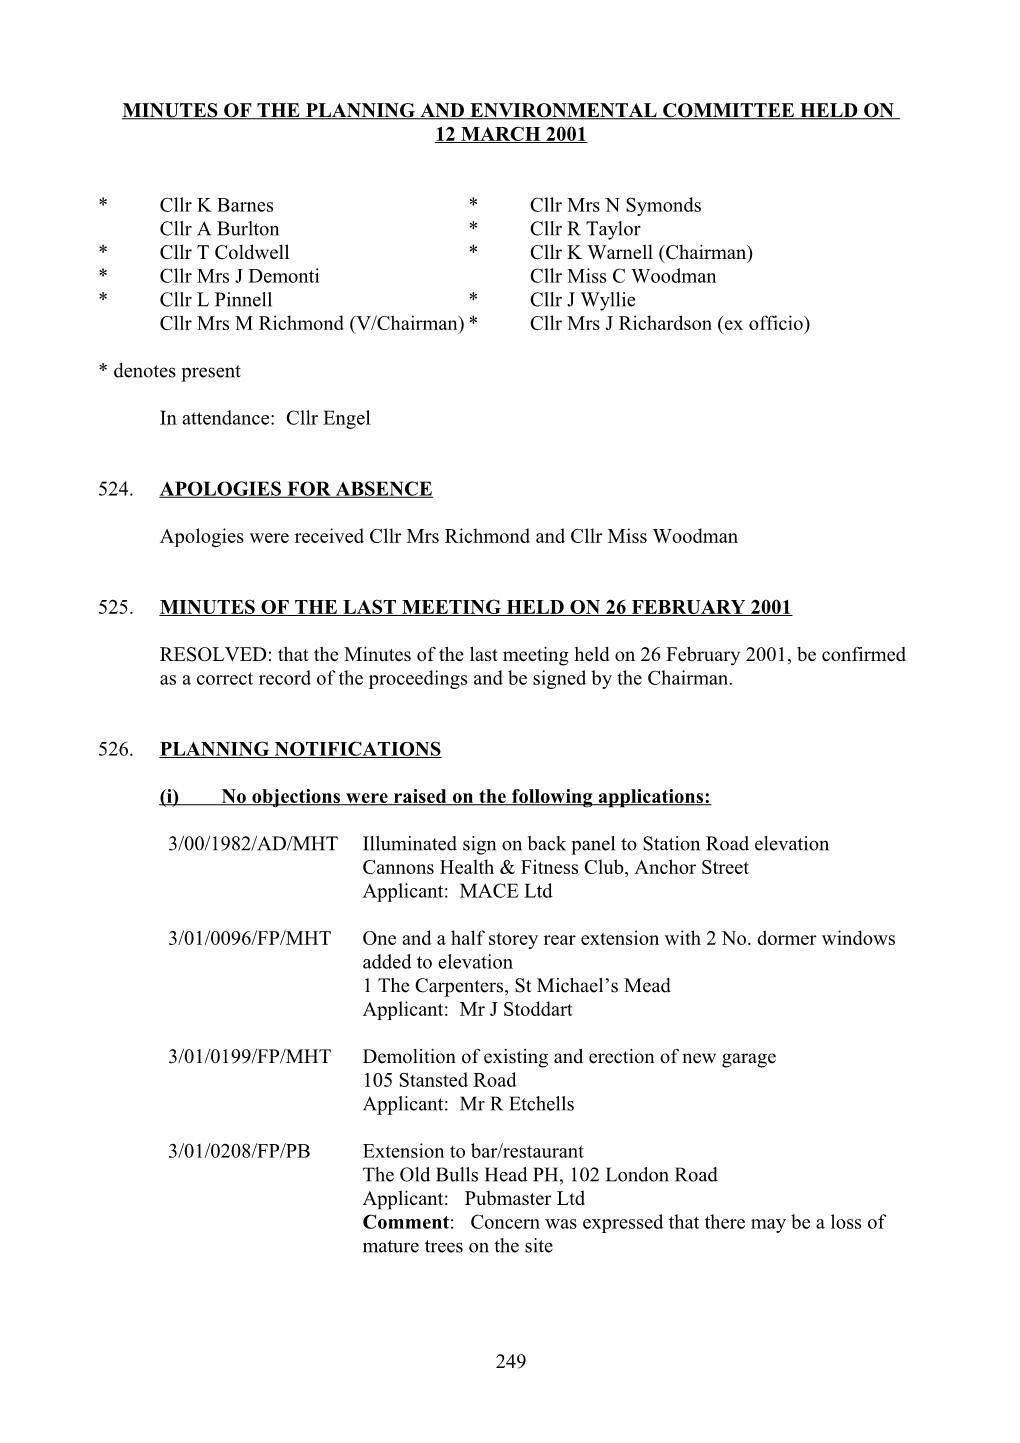 Minutes of the Planning and Environmental Committee Held on 6 November 2000